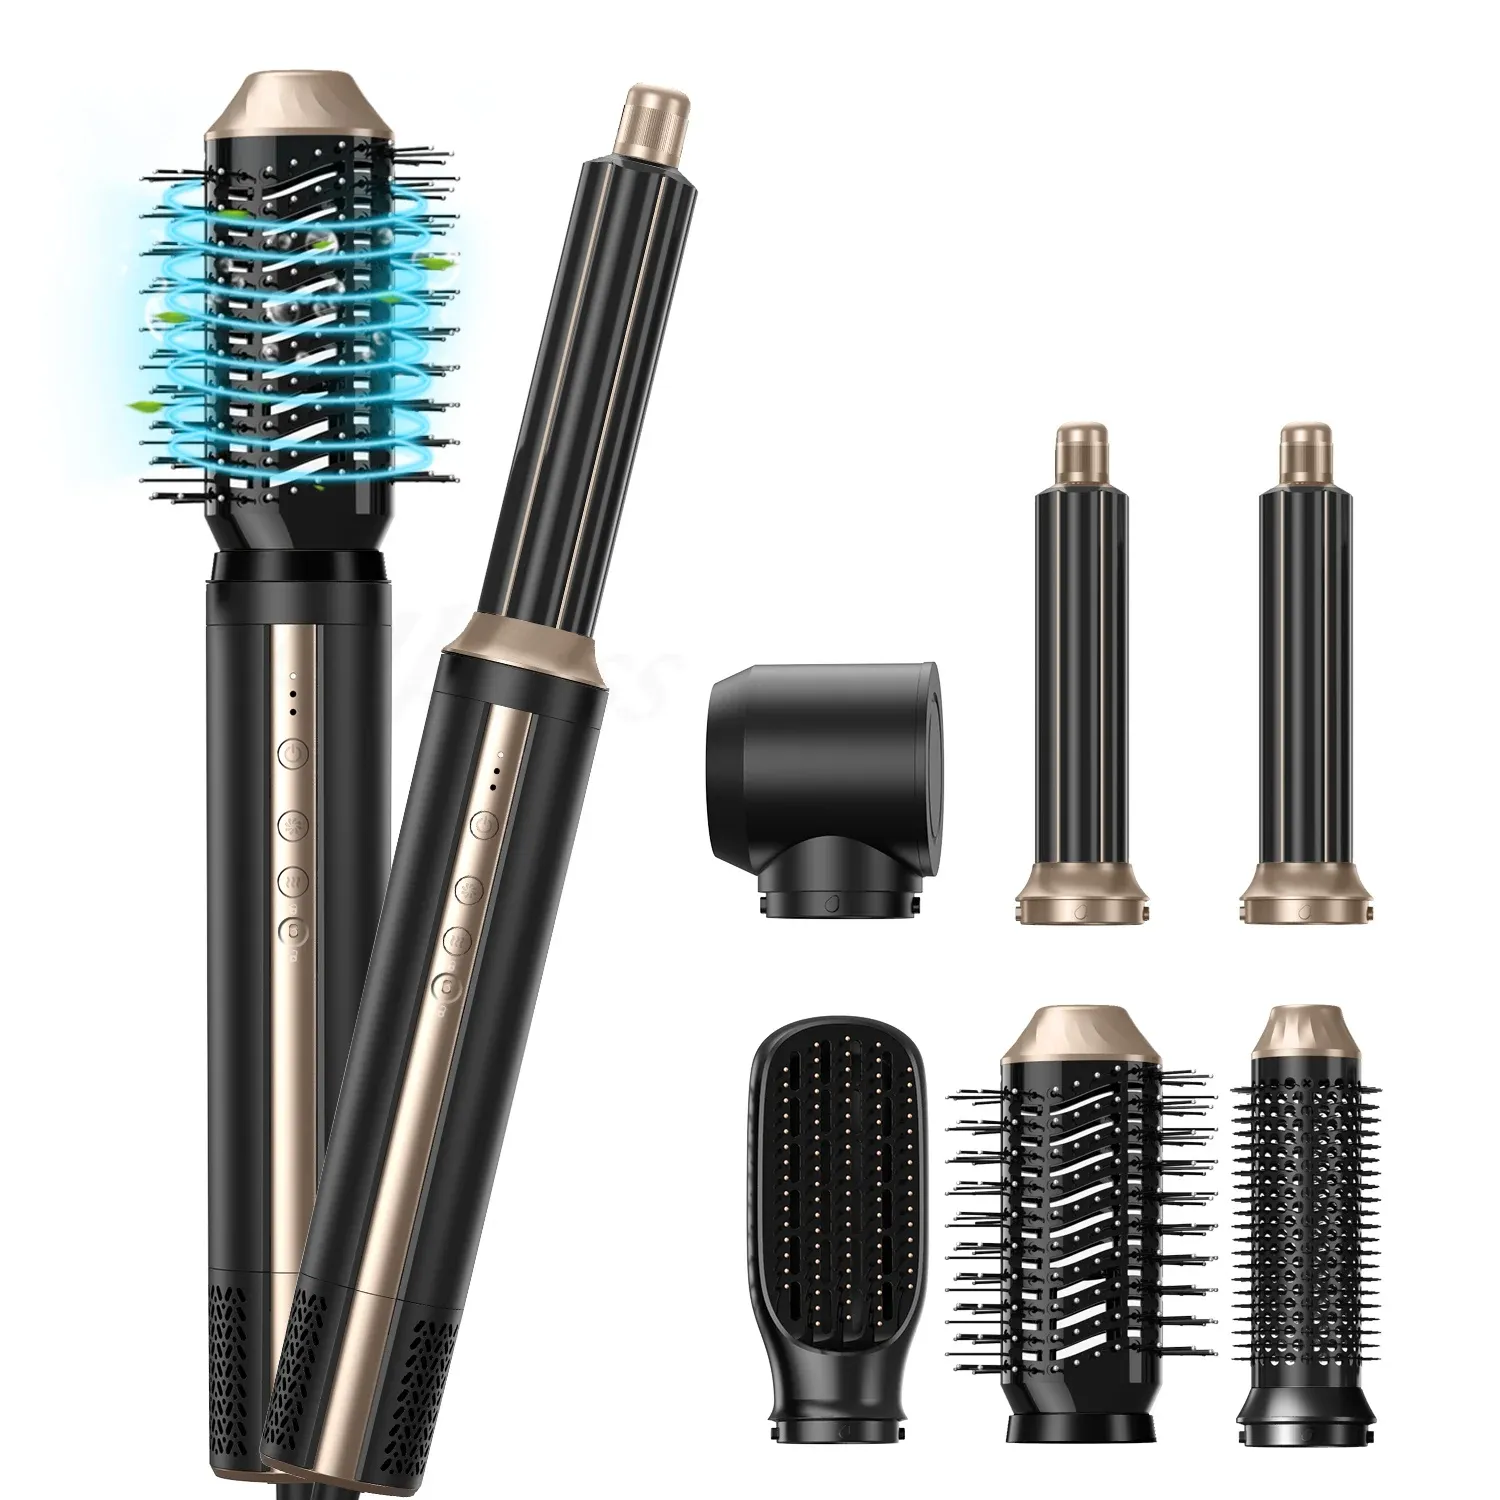 Brushes 6 In 1 Blow Dryer Brush Hot Thermal Brush High Speed Hair Dryer Rotating Straightener Curling Wand Hair Air Styling Tools Set